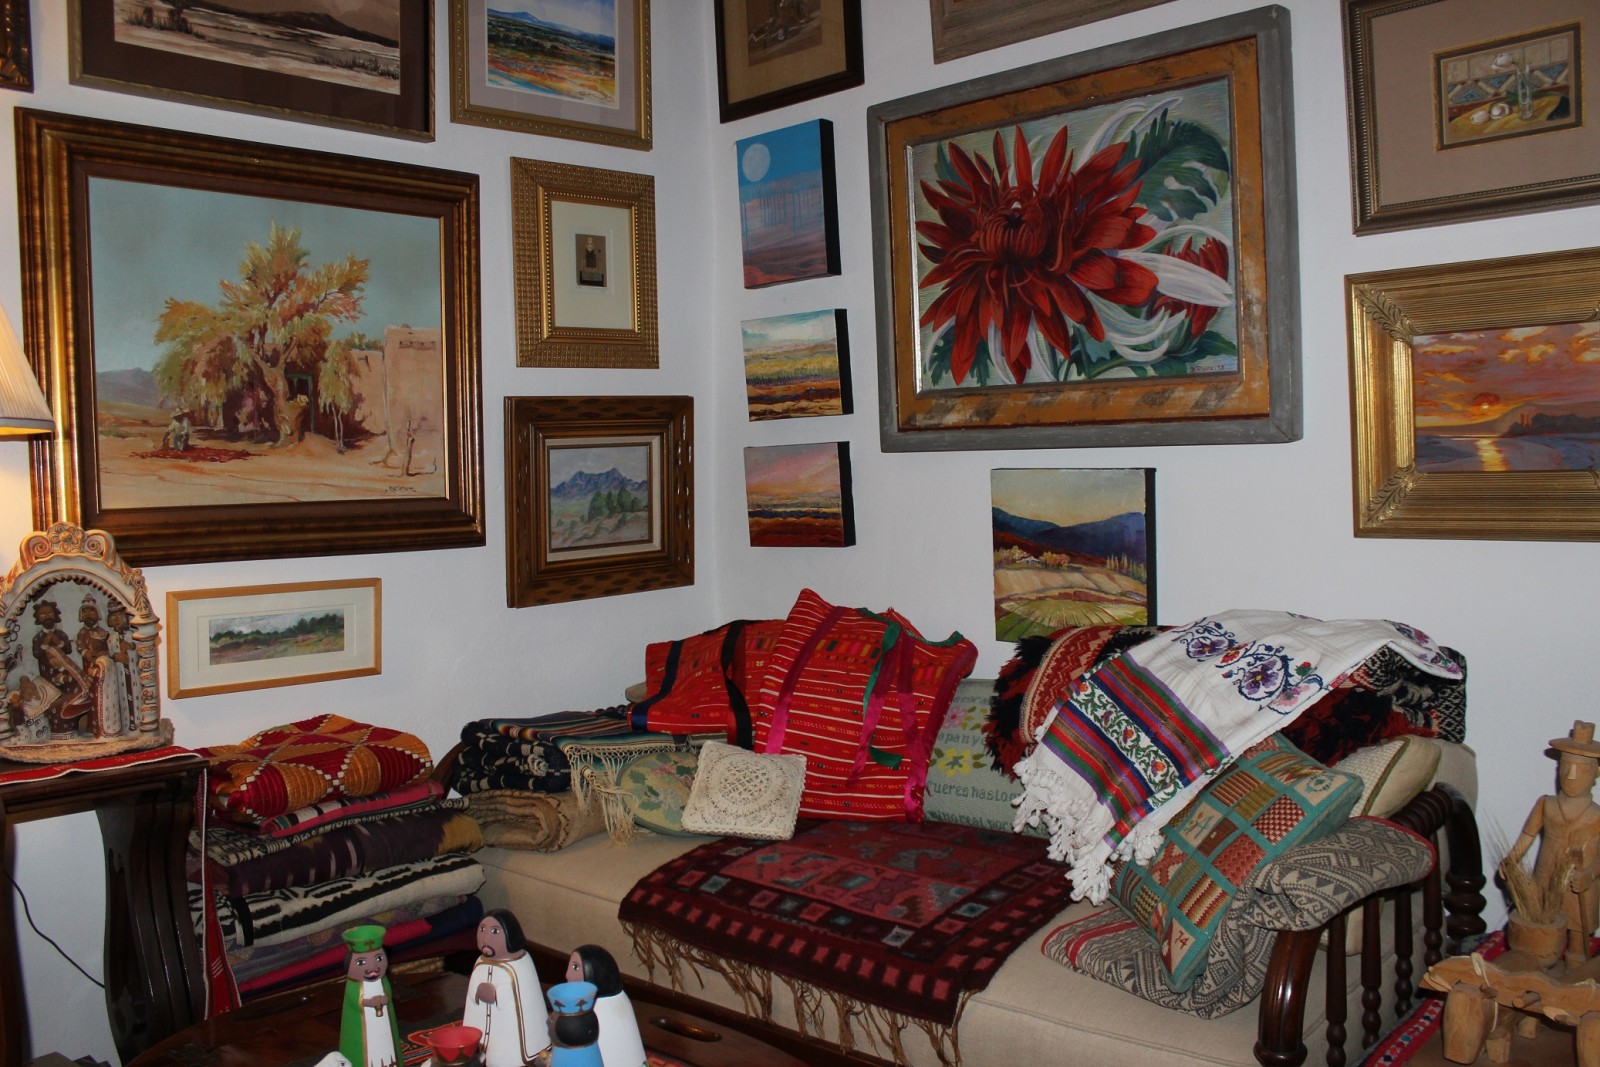 The Sitting Room at the Taylor-Mesilla Historic Property